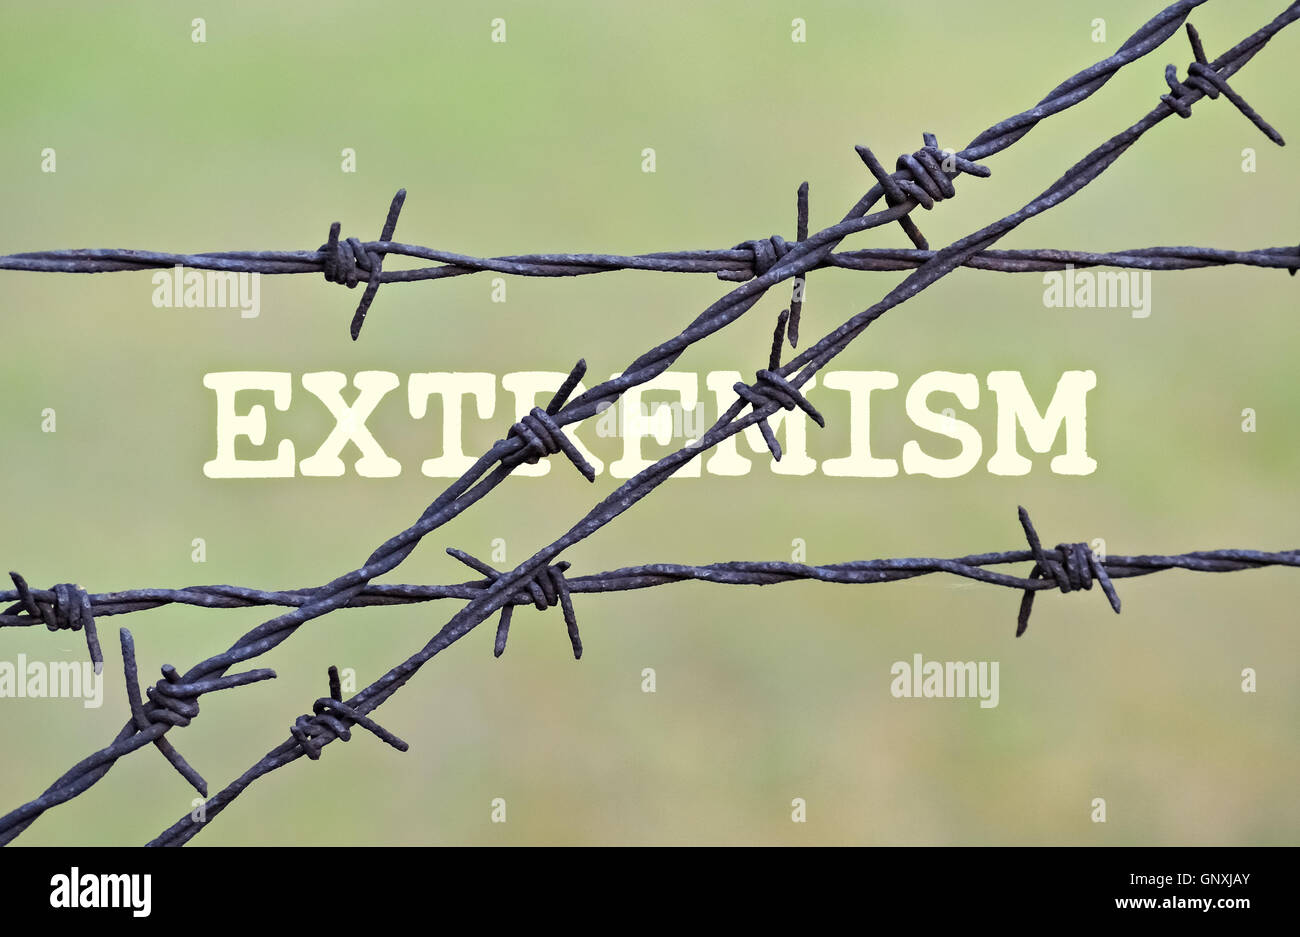 Word Extremism written under a wire fence with barbs Stock Photo